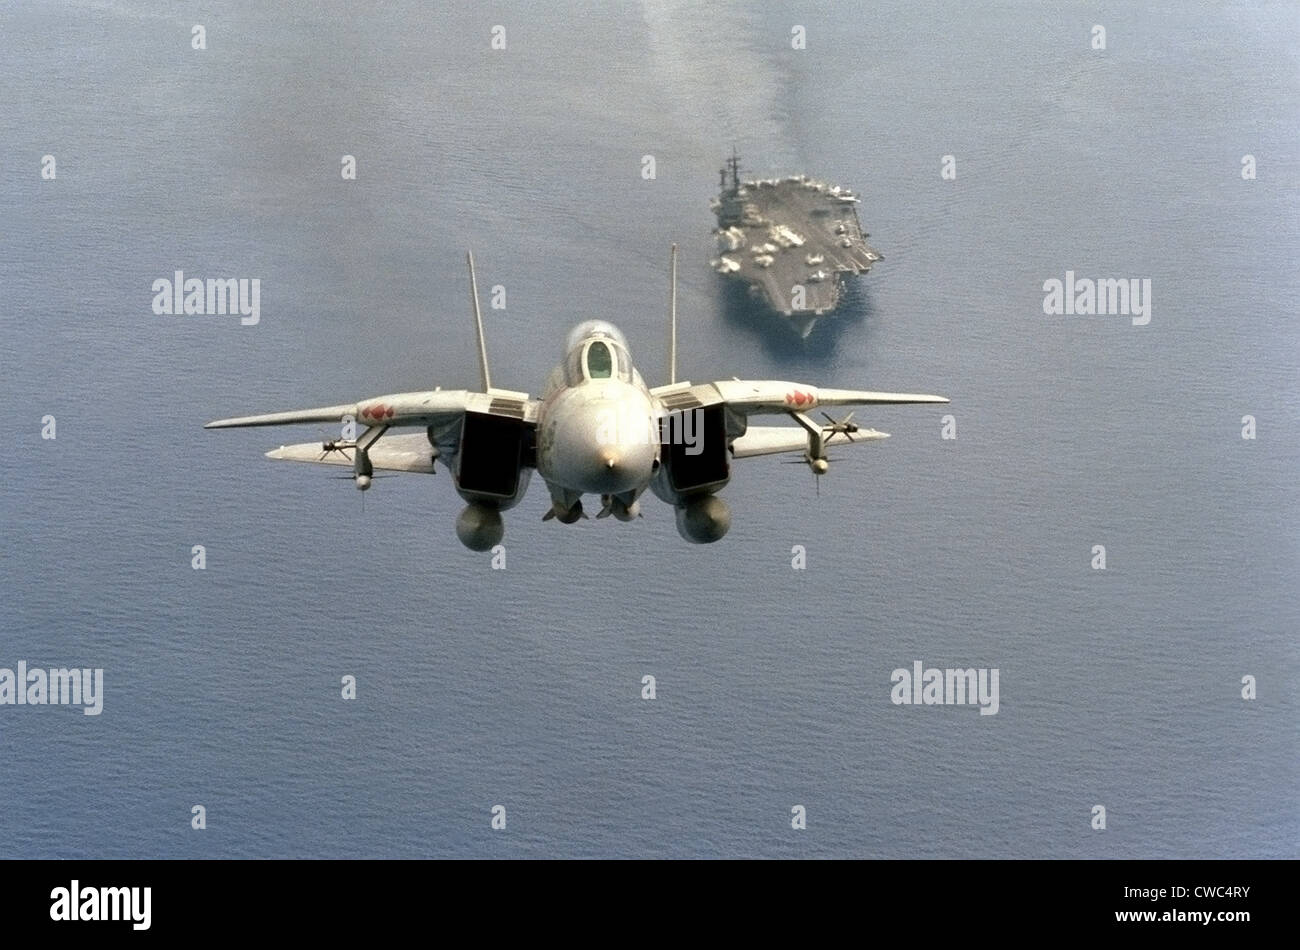 F-14 Tomcat fighter just after take-off from the aircraft carrier USS AMERICA is armed with missiles mounted on wing pylons. Stock Photo